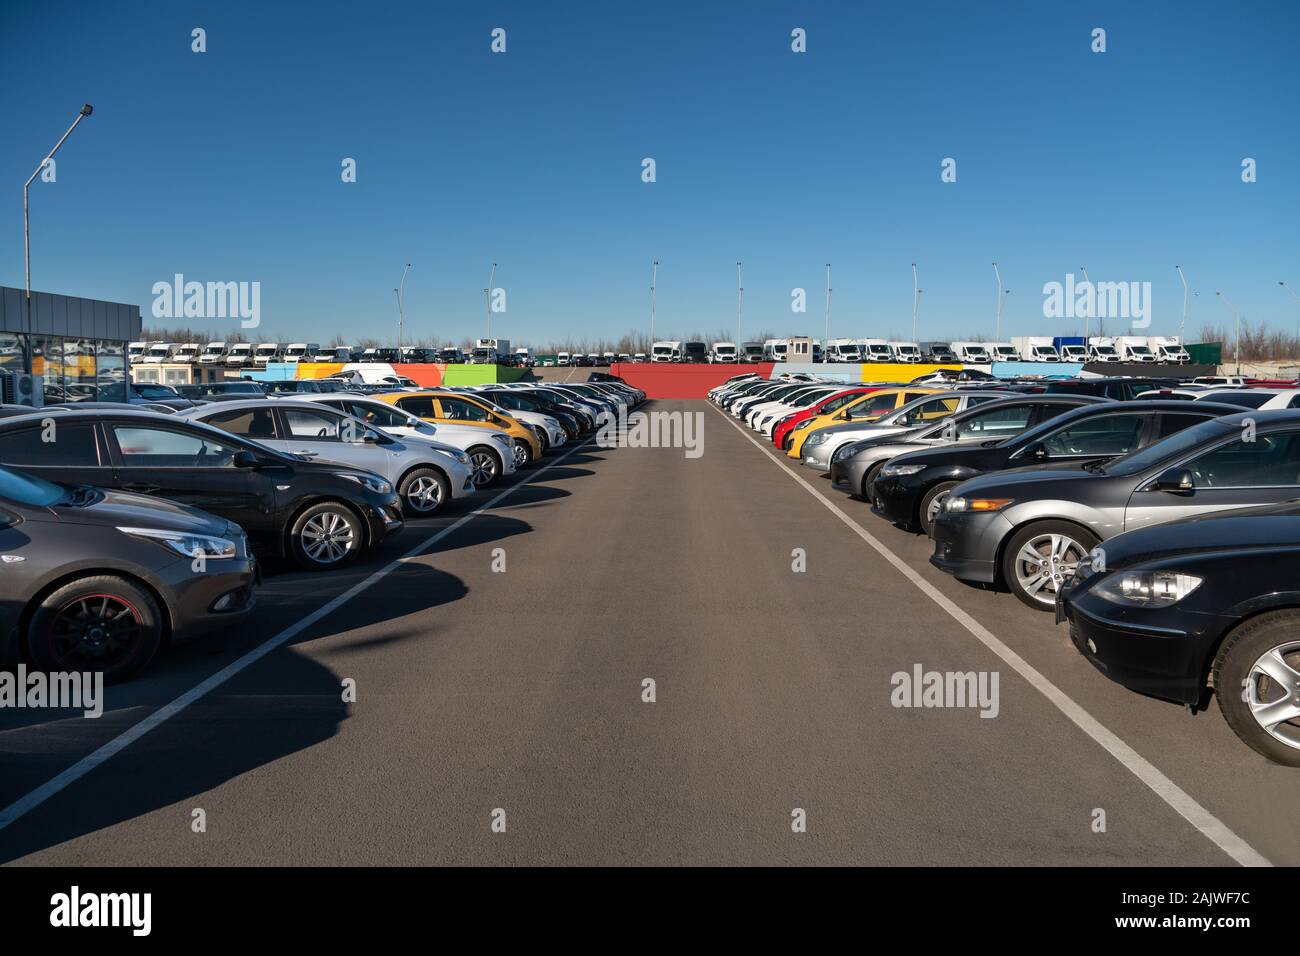 Cars in a rows. Used car sales Stock Photo